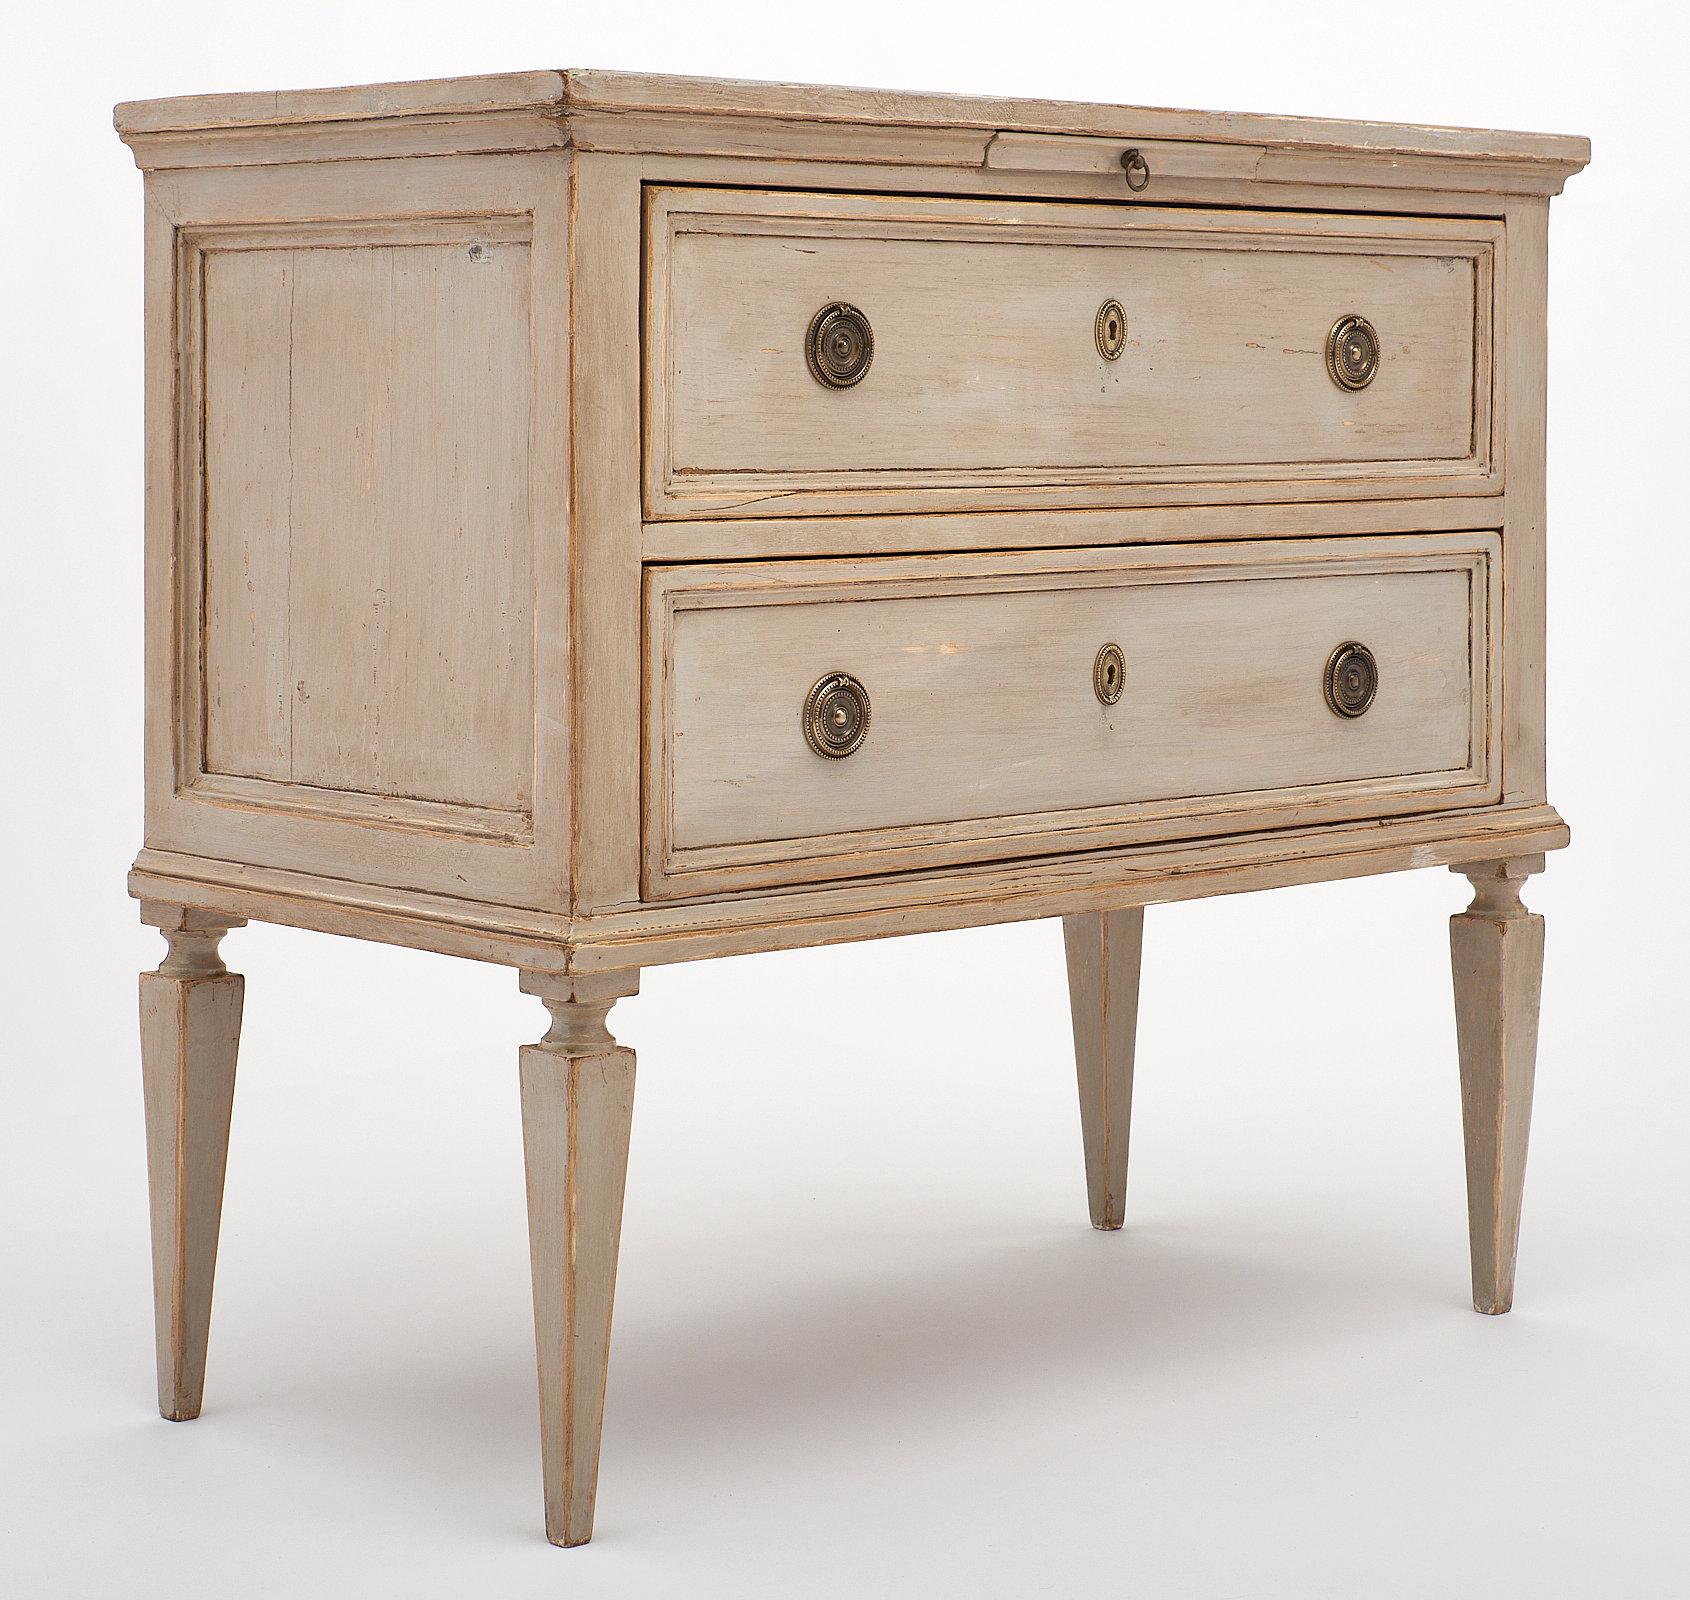 Louis XVI Antique Solid Fir Tuscan Chests